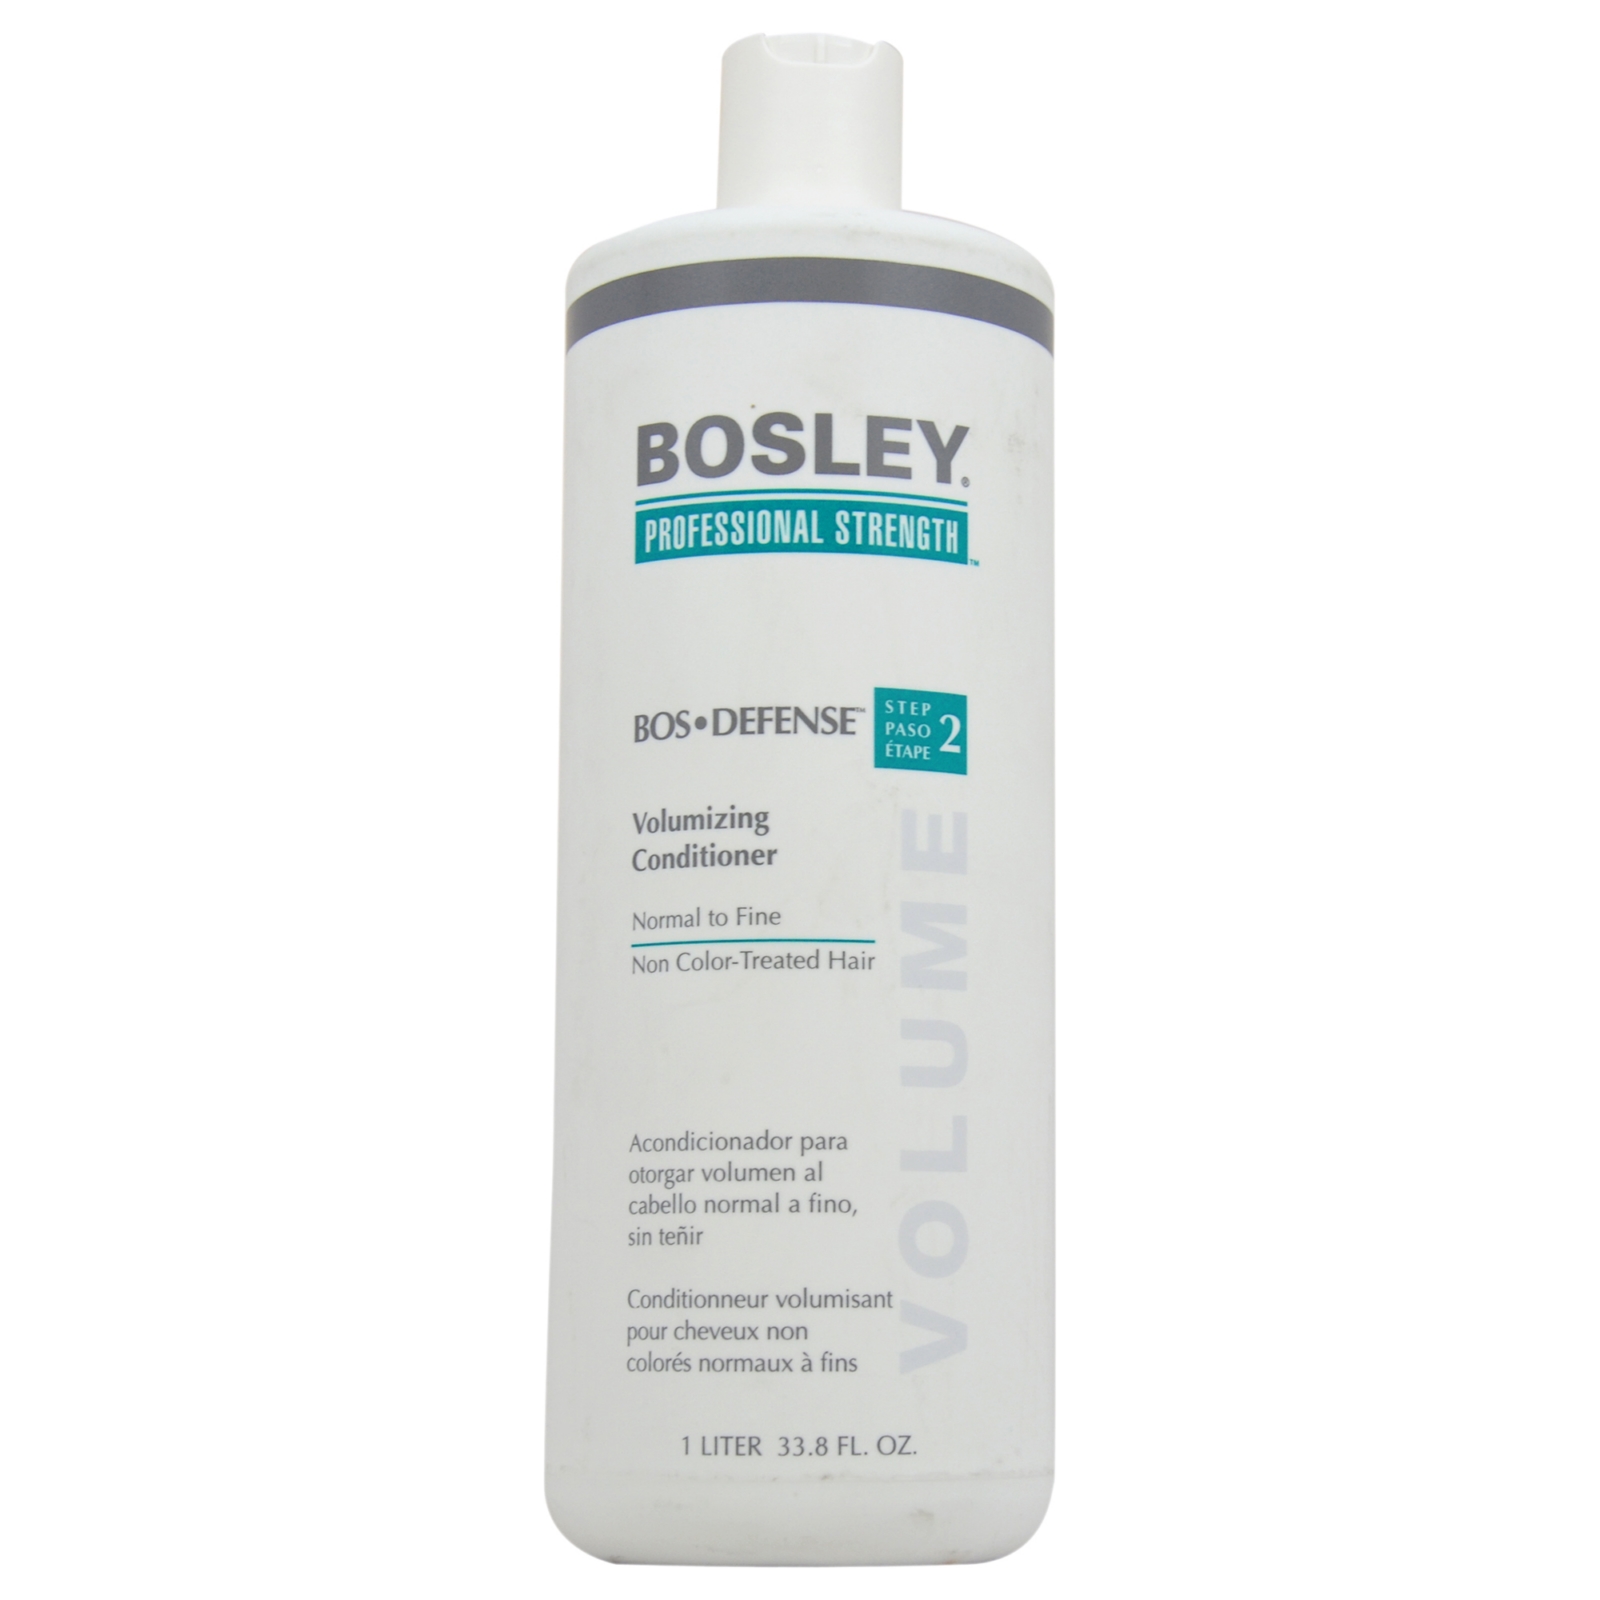 BOSLEY Bos-Defense Volumizing Conditioner for Normal To Fine Non Color-Treated Hair by  for Unisex - 33.8 oz Conditioner